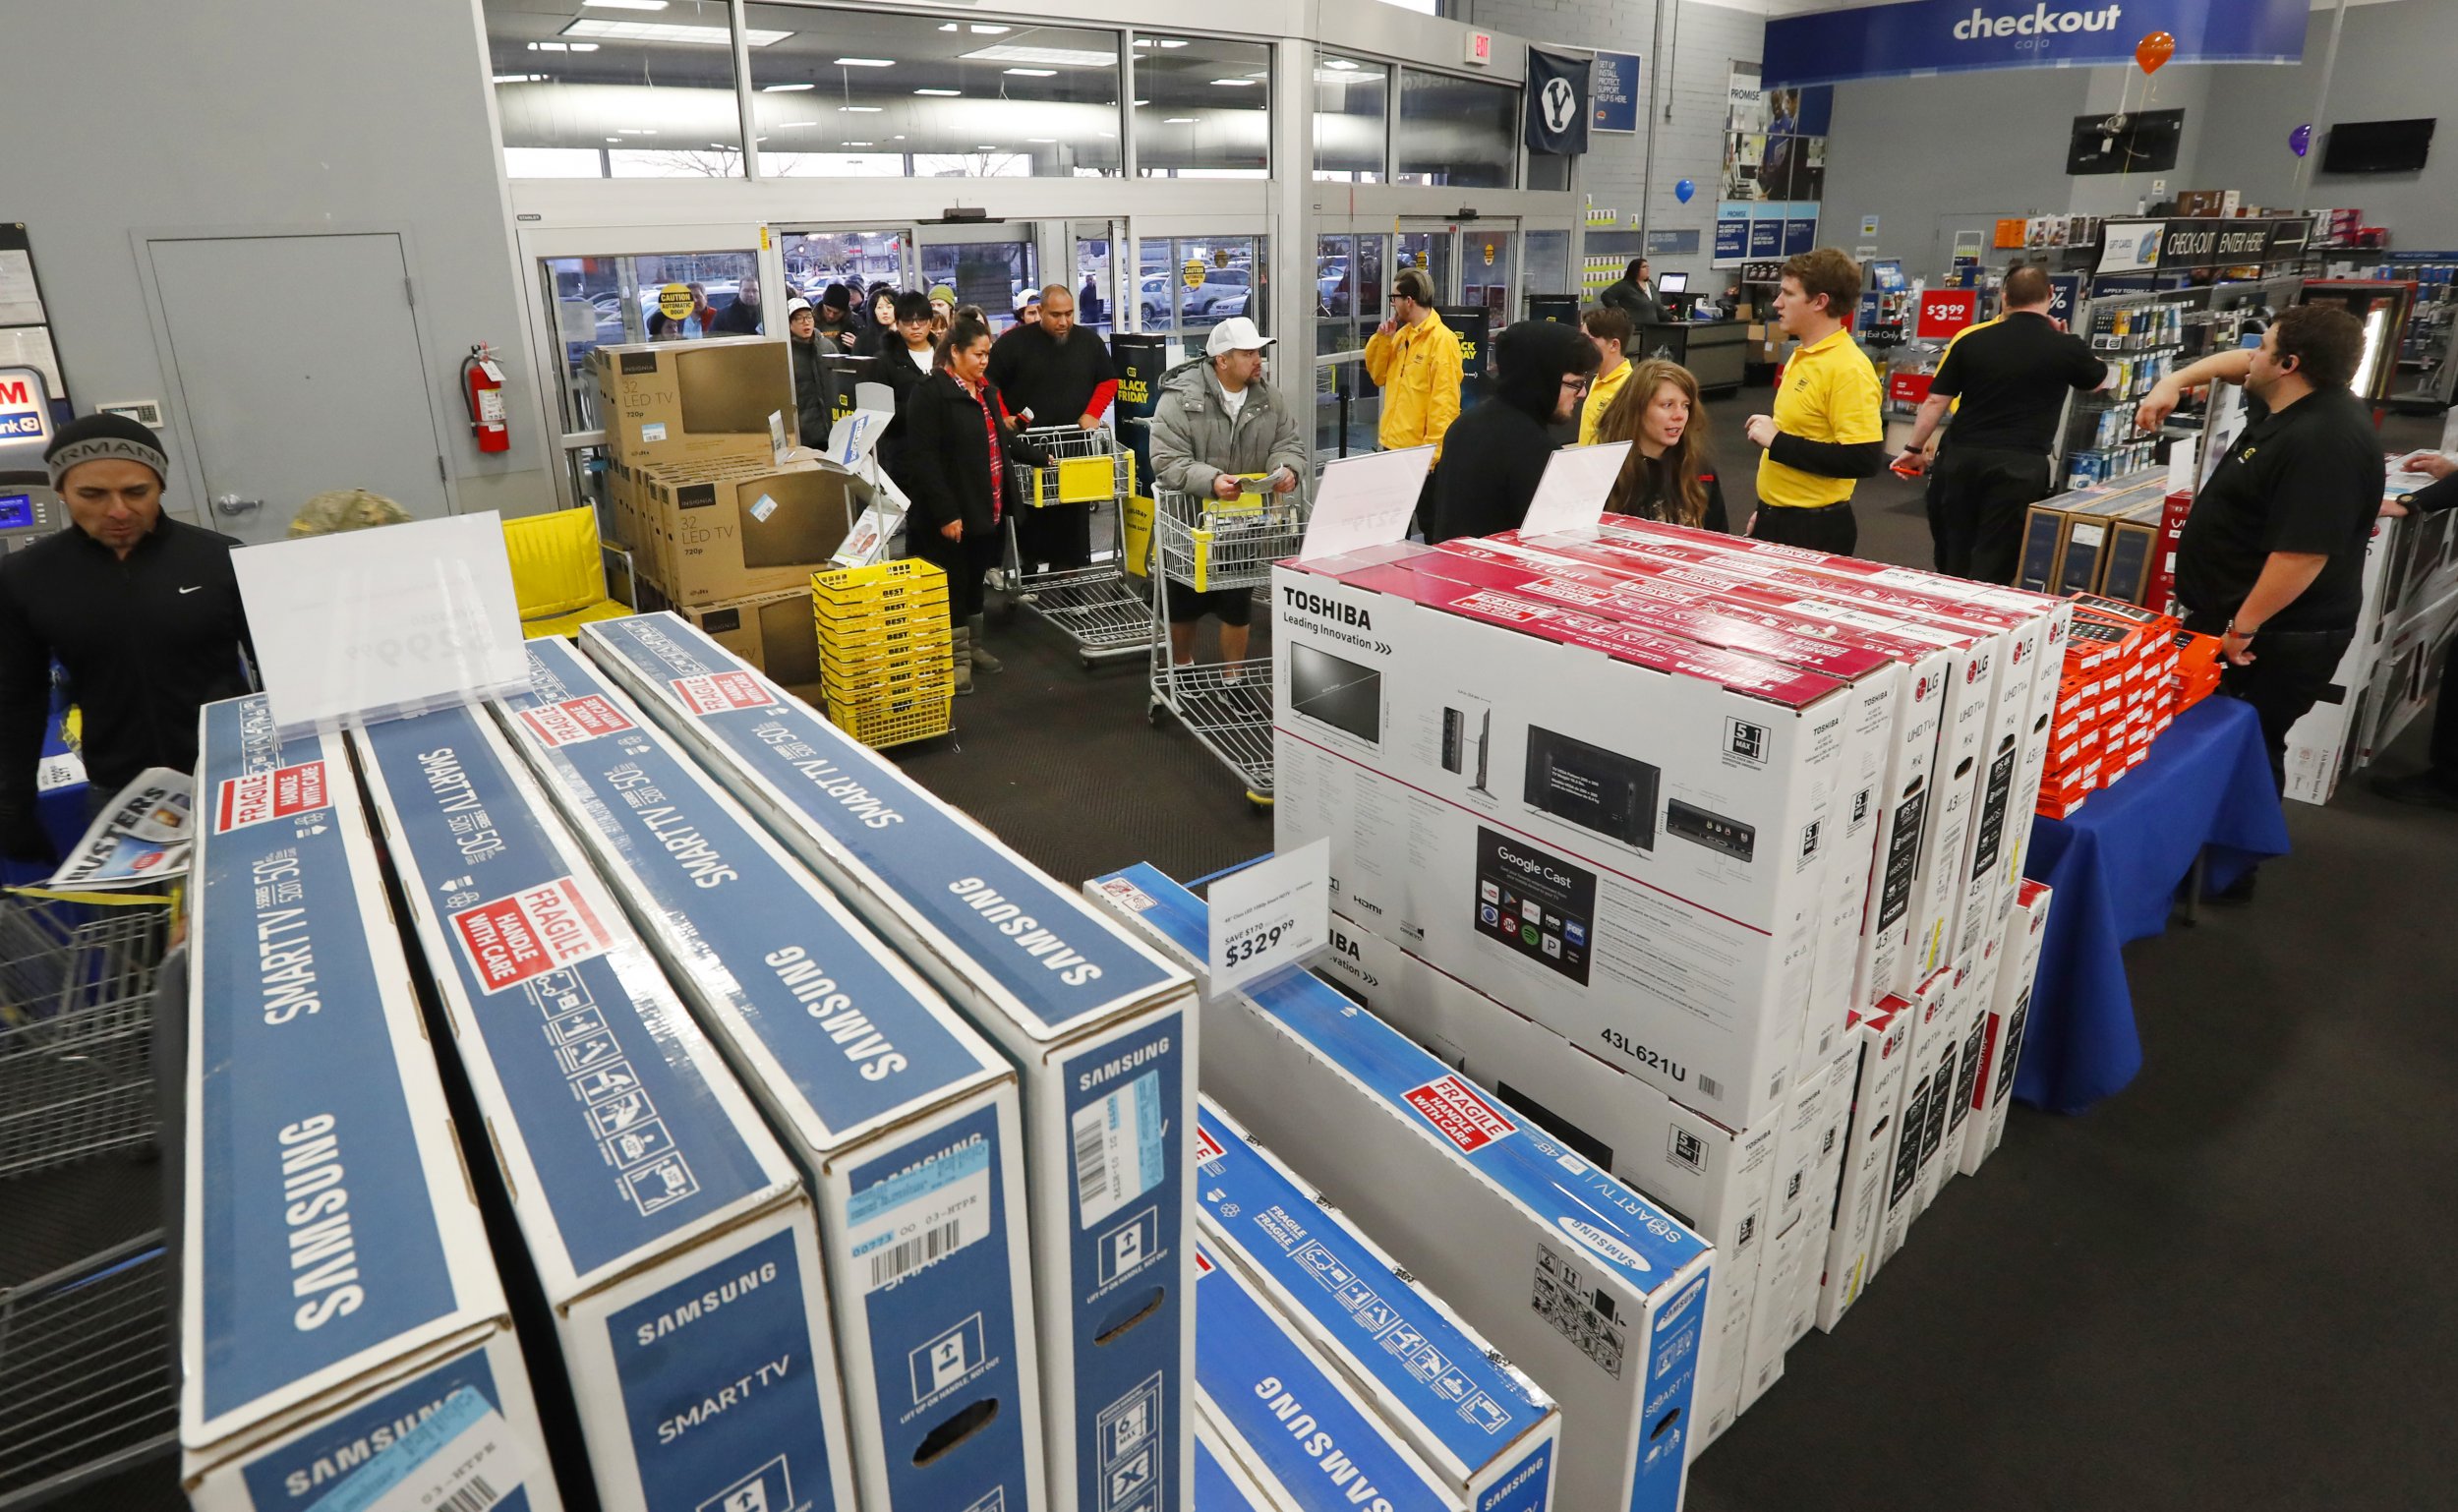 Best Buy Black Friday 2018 Ad, Flyer: TV, Apple Products and More Listed as Deals